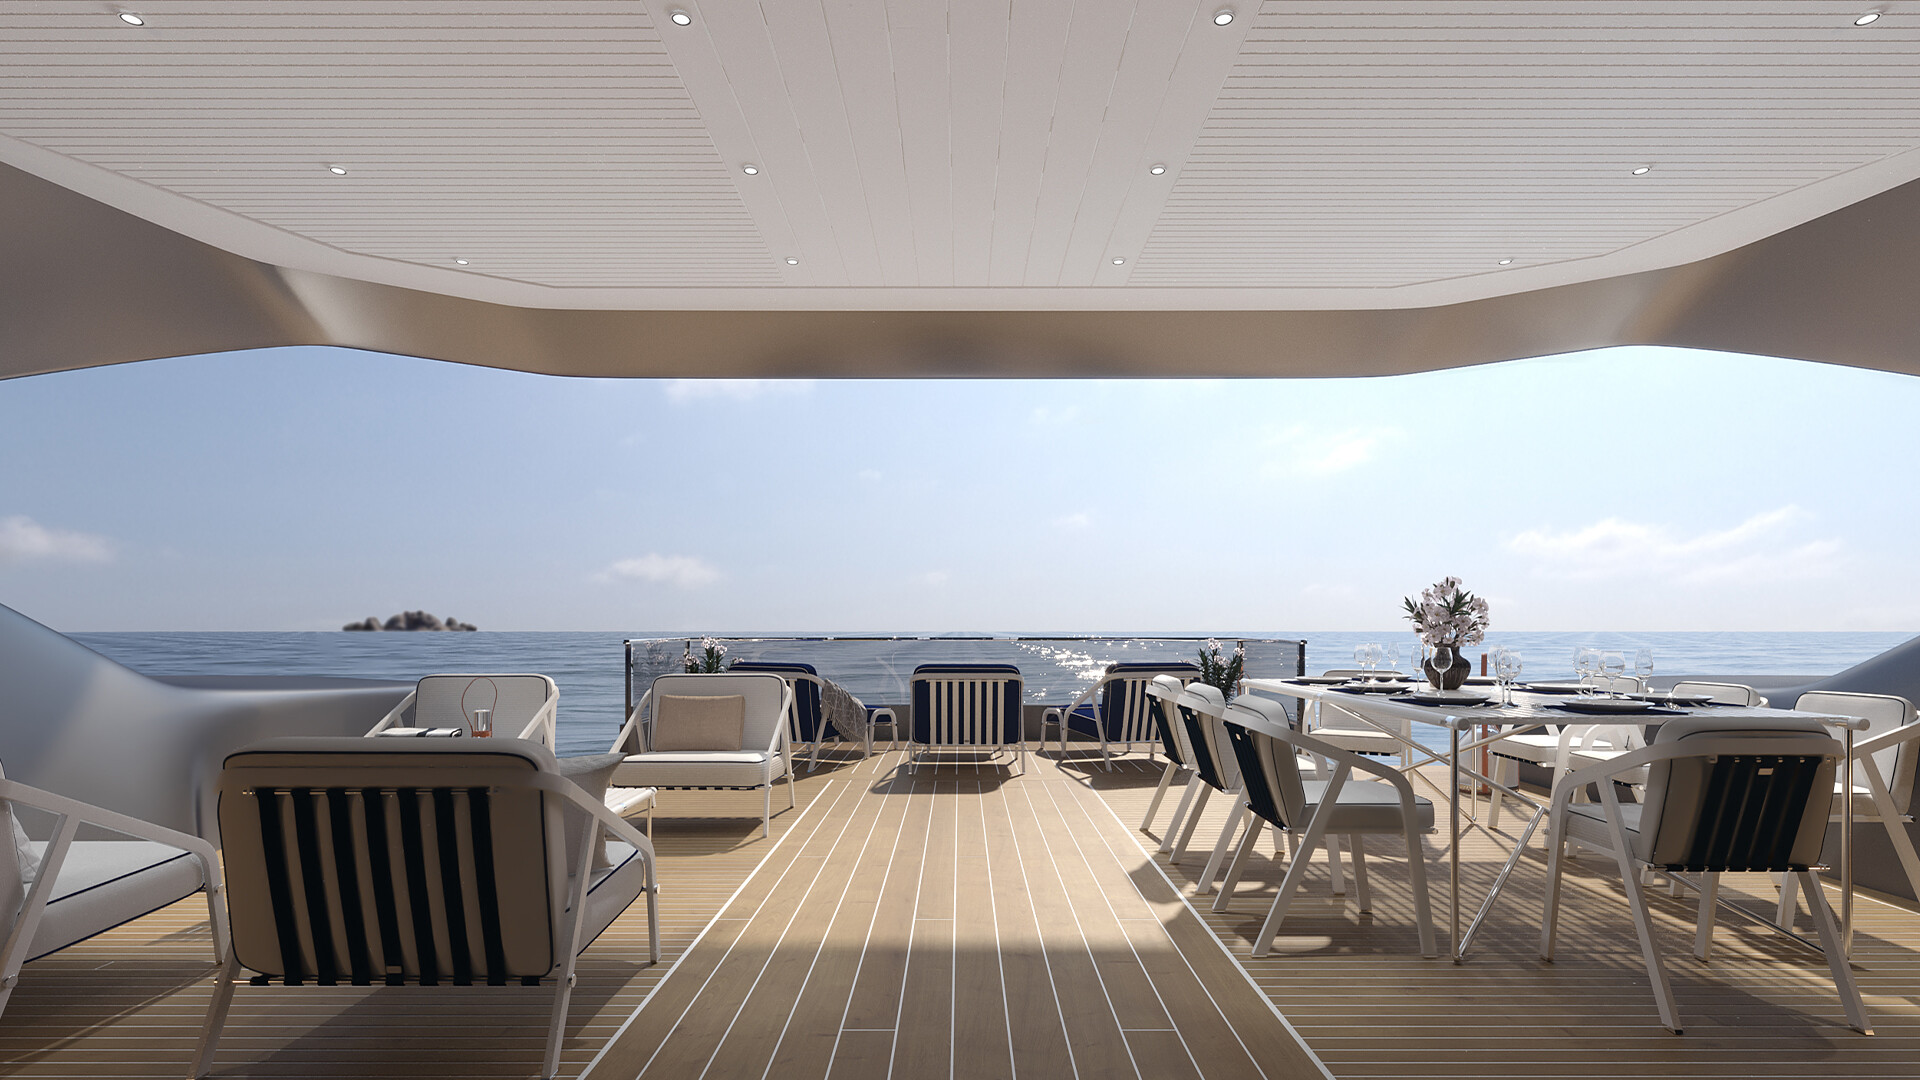 myface-top-yacht-project (2)